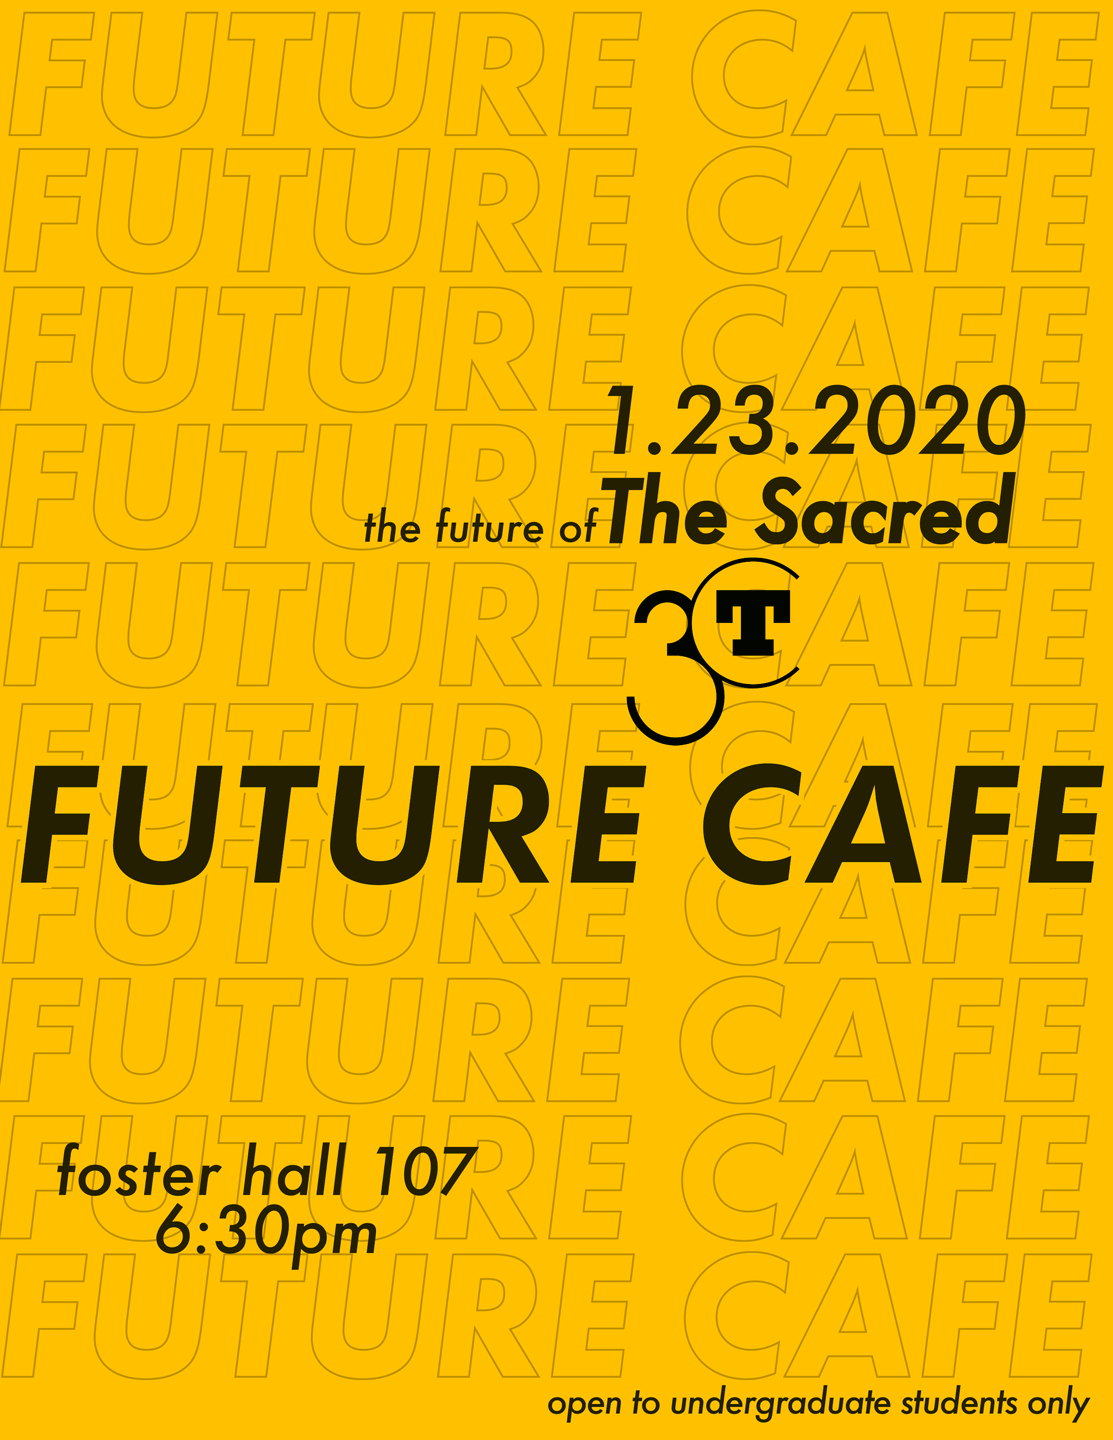 poster for the Future Cafe on The Sacred